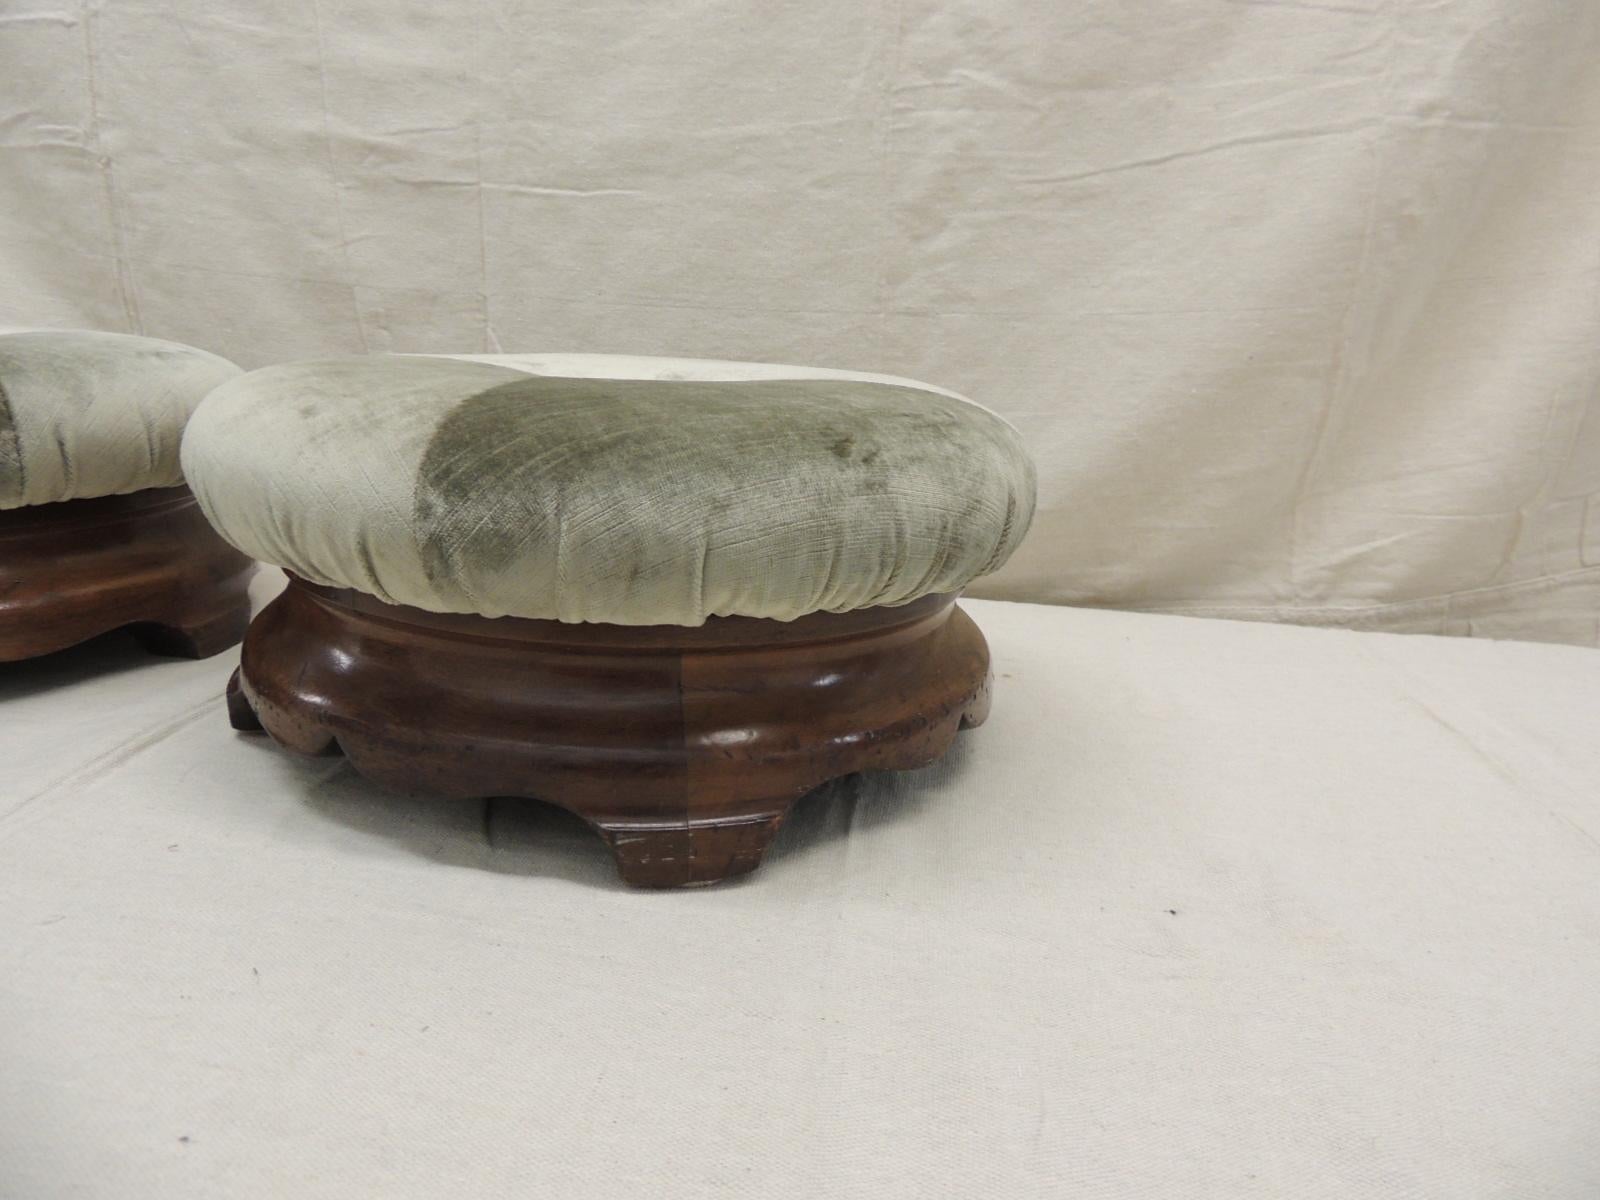 Pair of 19th century green velvet upholstered round footstools.
Round mahogany old weavers celadon green silk velvet upholstery and brown center silk tufted button.
Size: 14.5